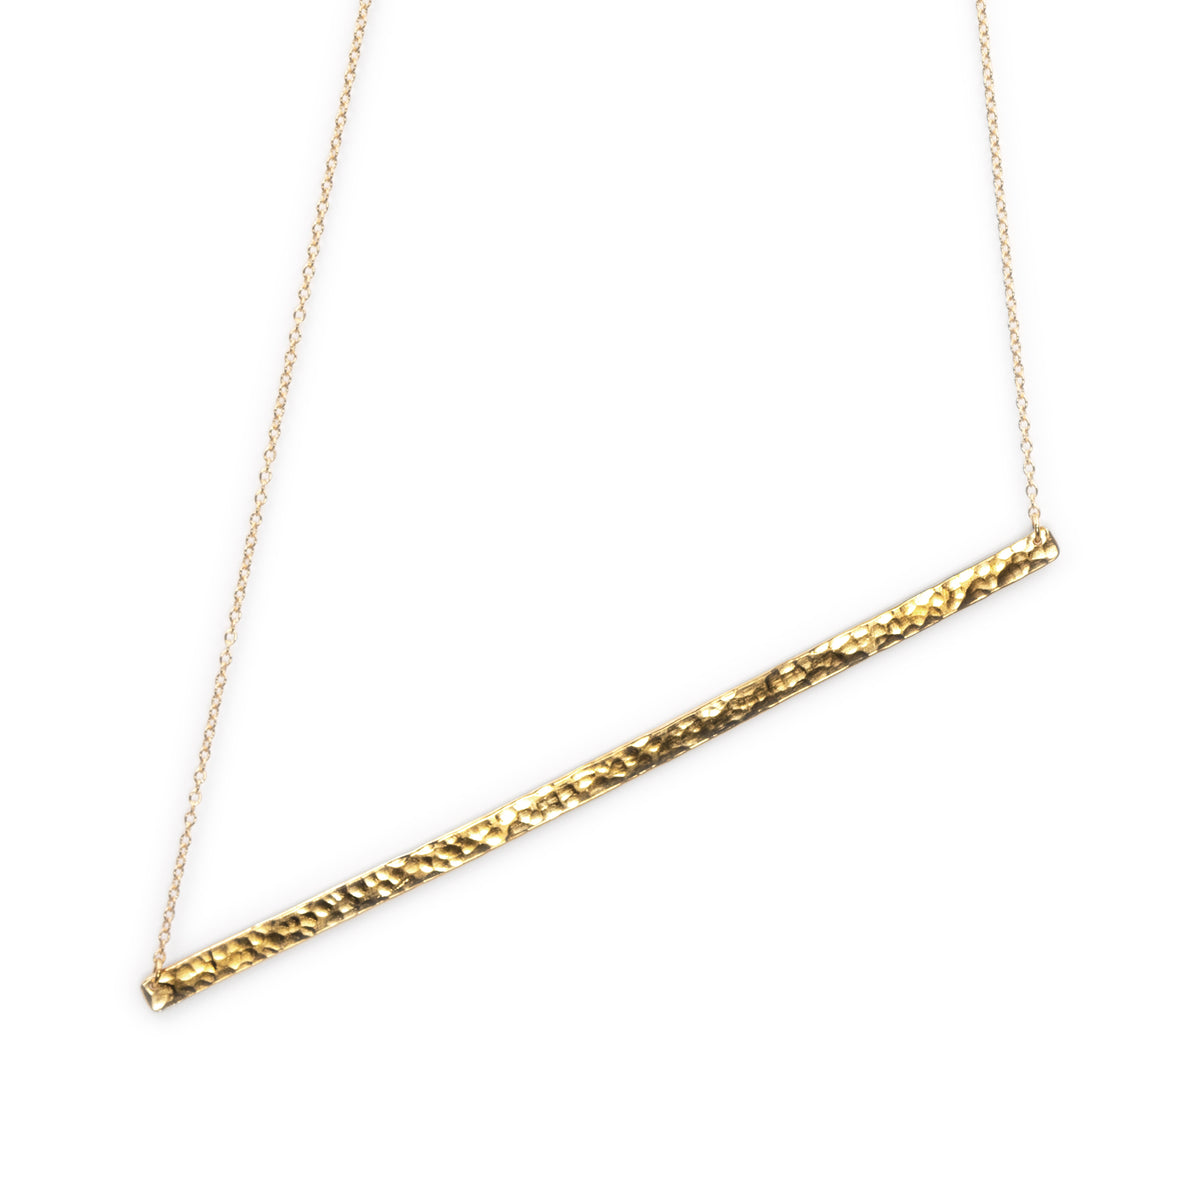 Gold plated Infinity necklace on sterling silver by Rouaida.